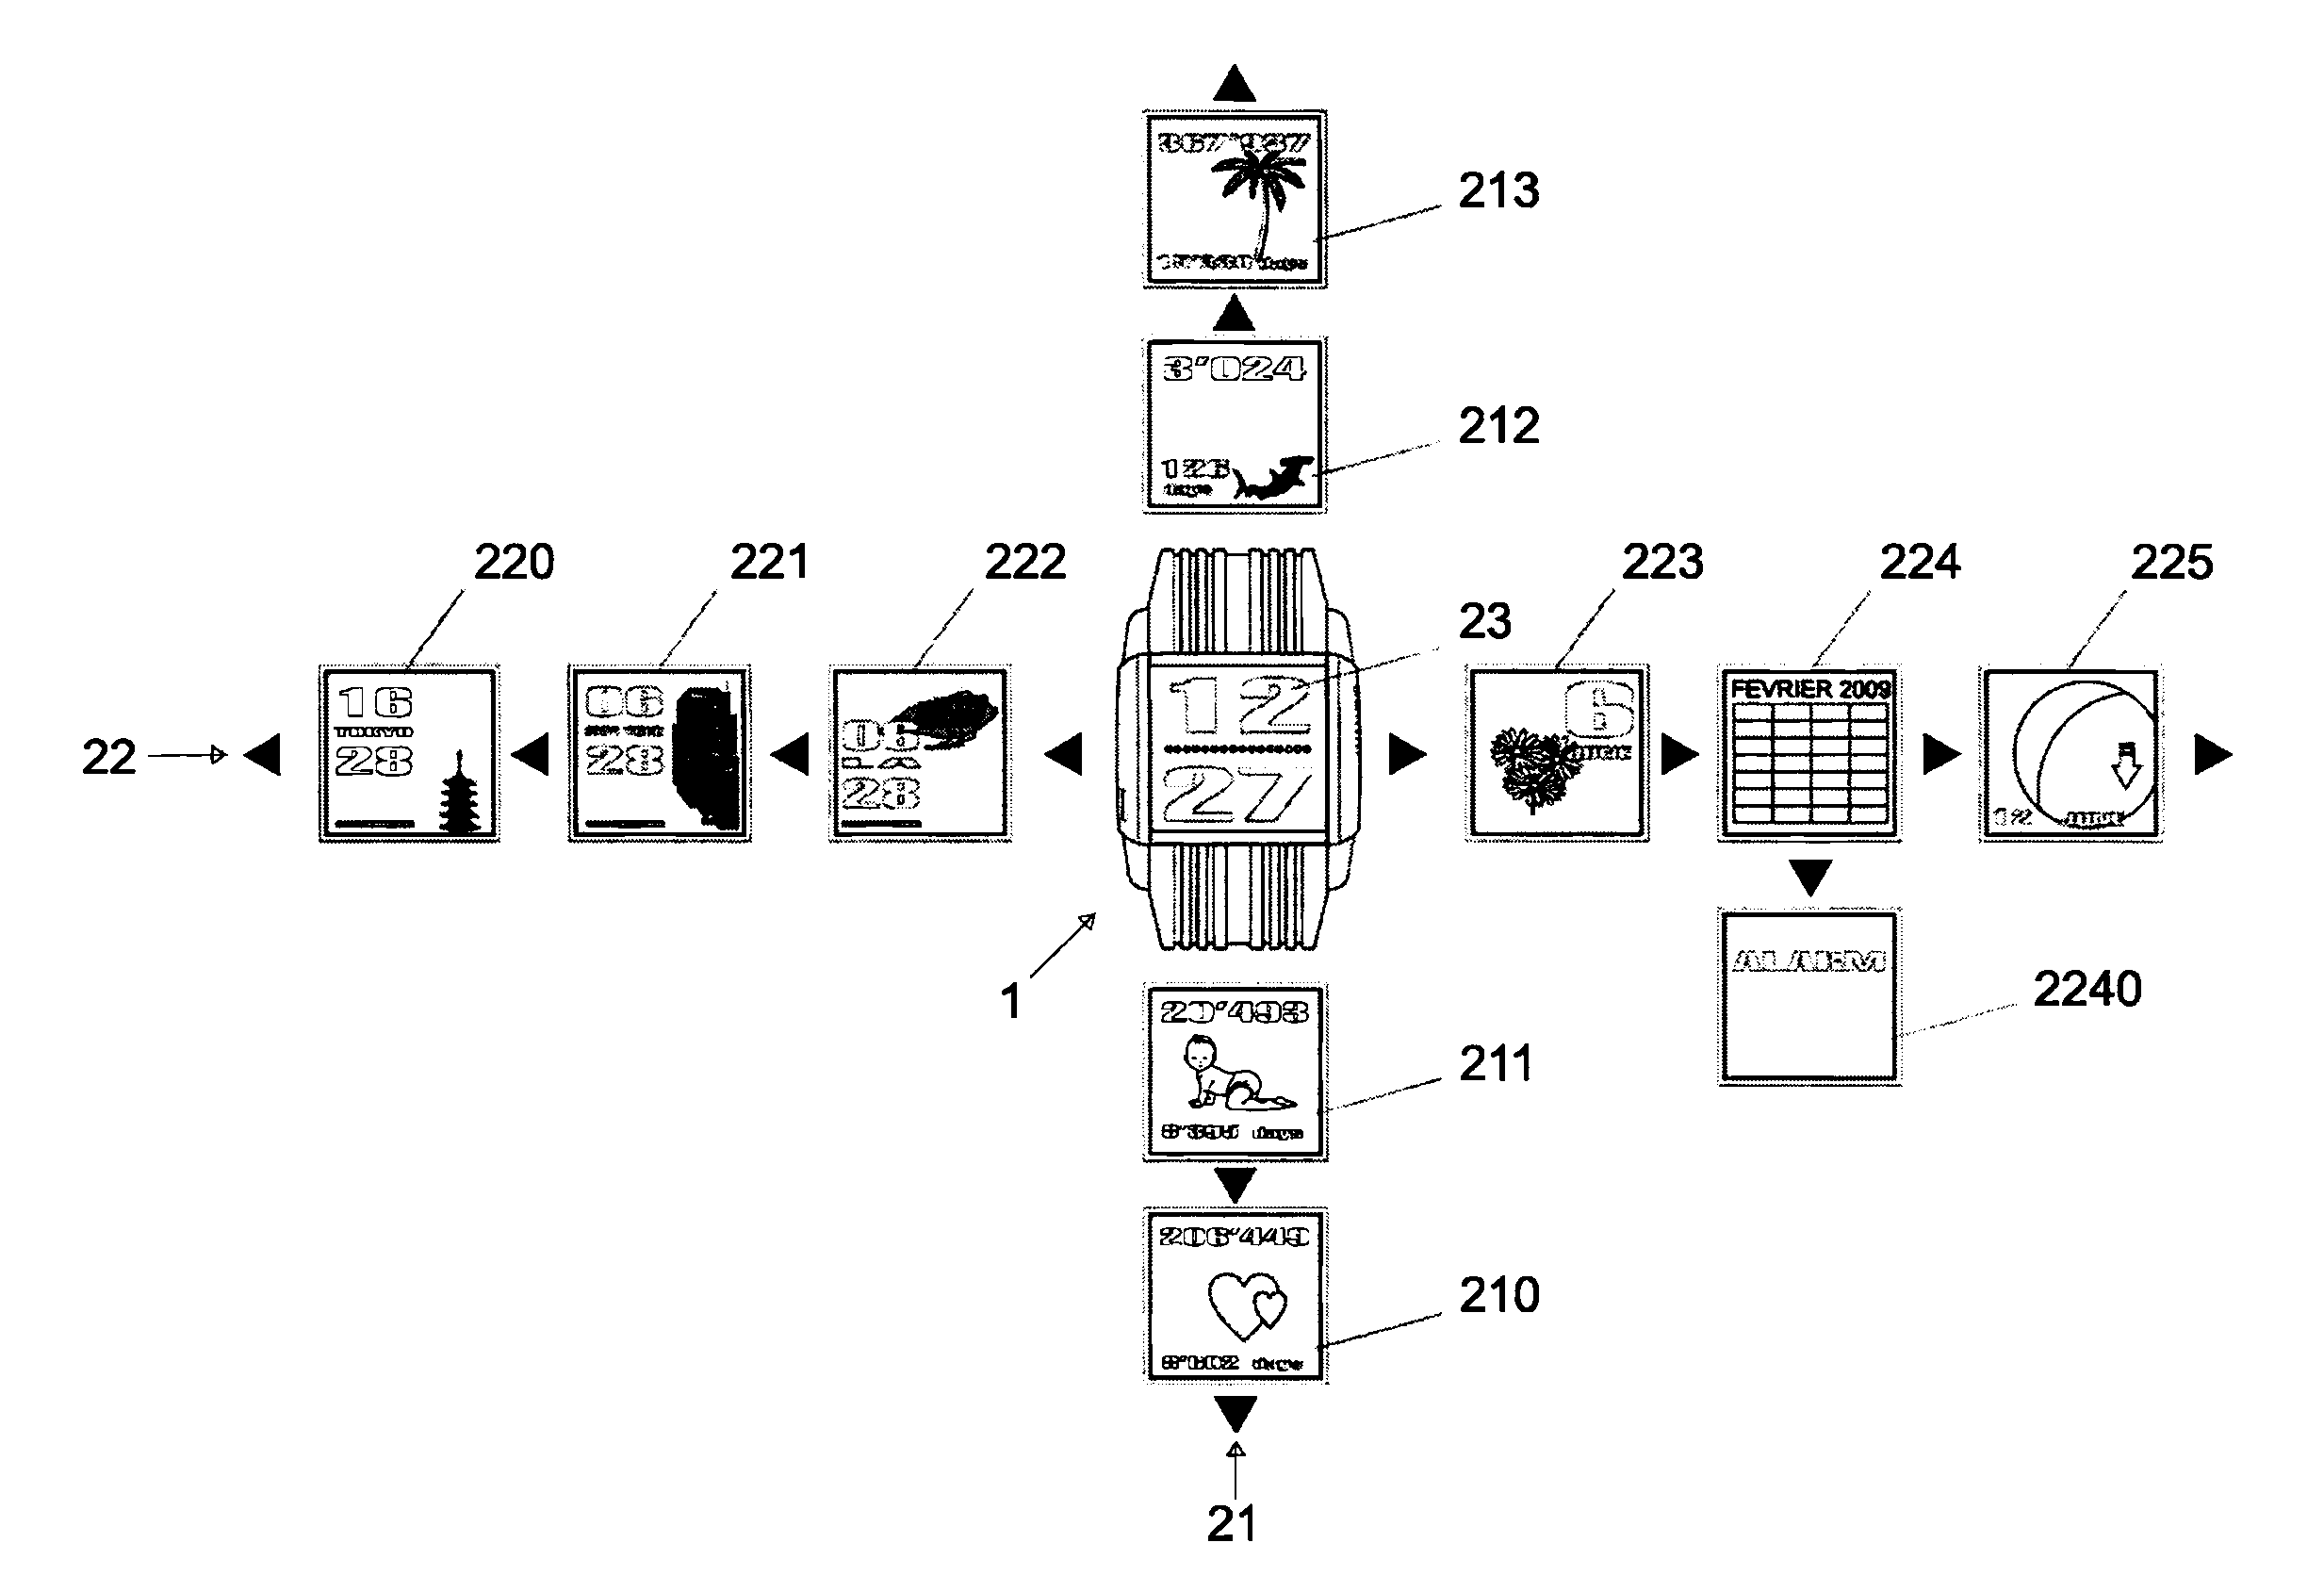 Wristwatch with a touch screen and method for displaying on a touch-screen watch